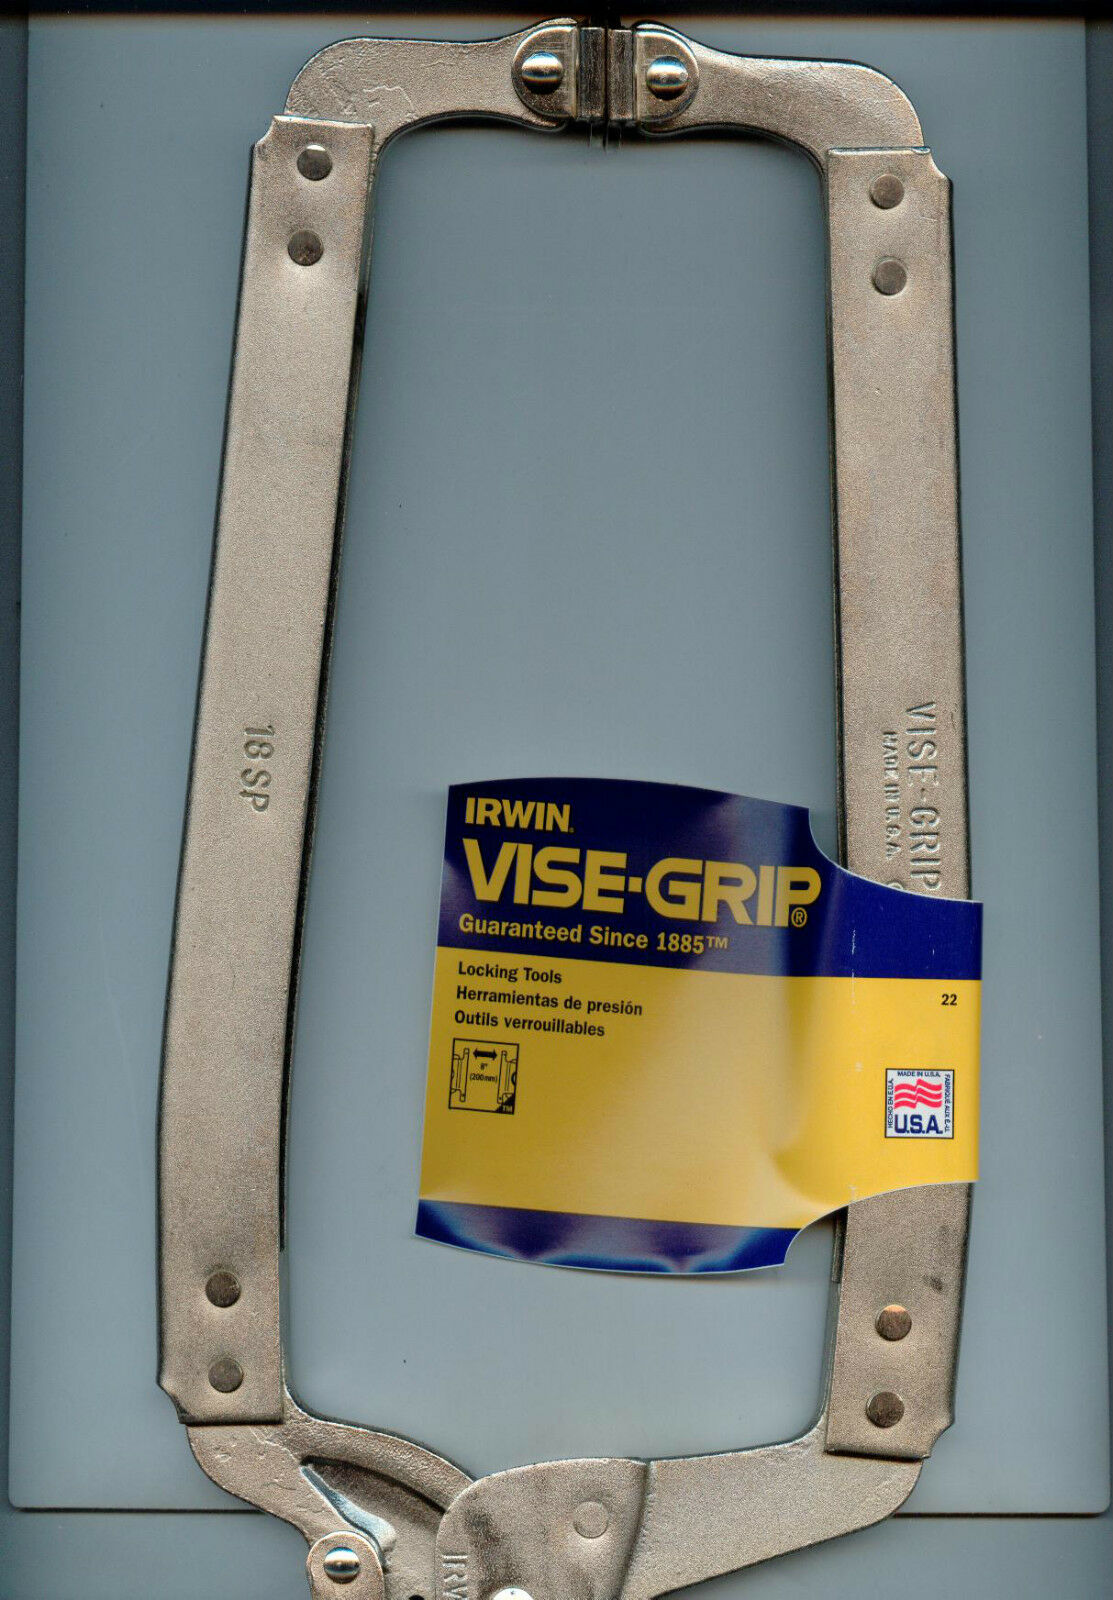 Irwin Vise Grip 18SP 18"long reach Locking C Clamp plier with Swivel Pads, 